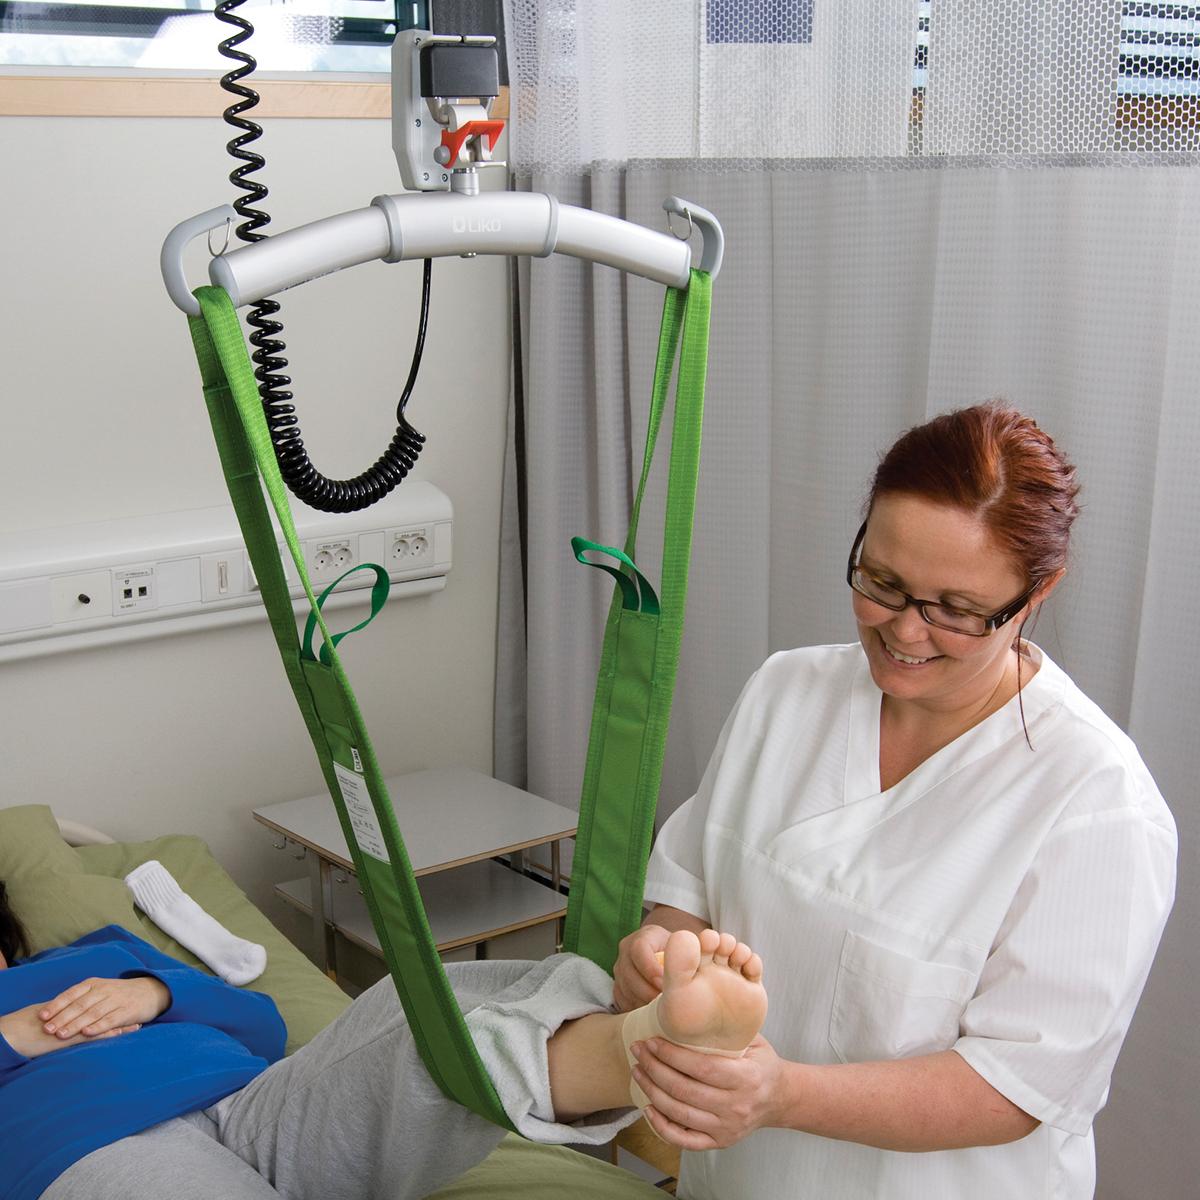 MultiStrap Lift Aid, green, in use with reclined patient's left foot in strap, held by female clinician in glasses